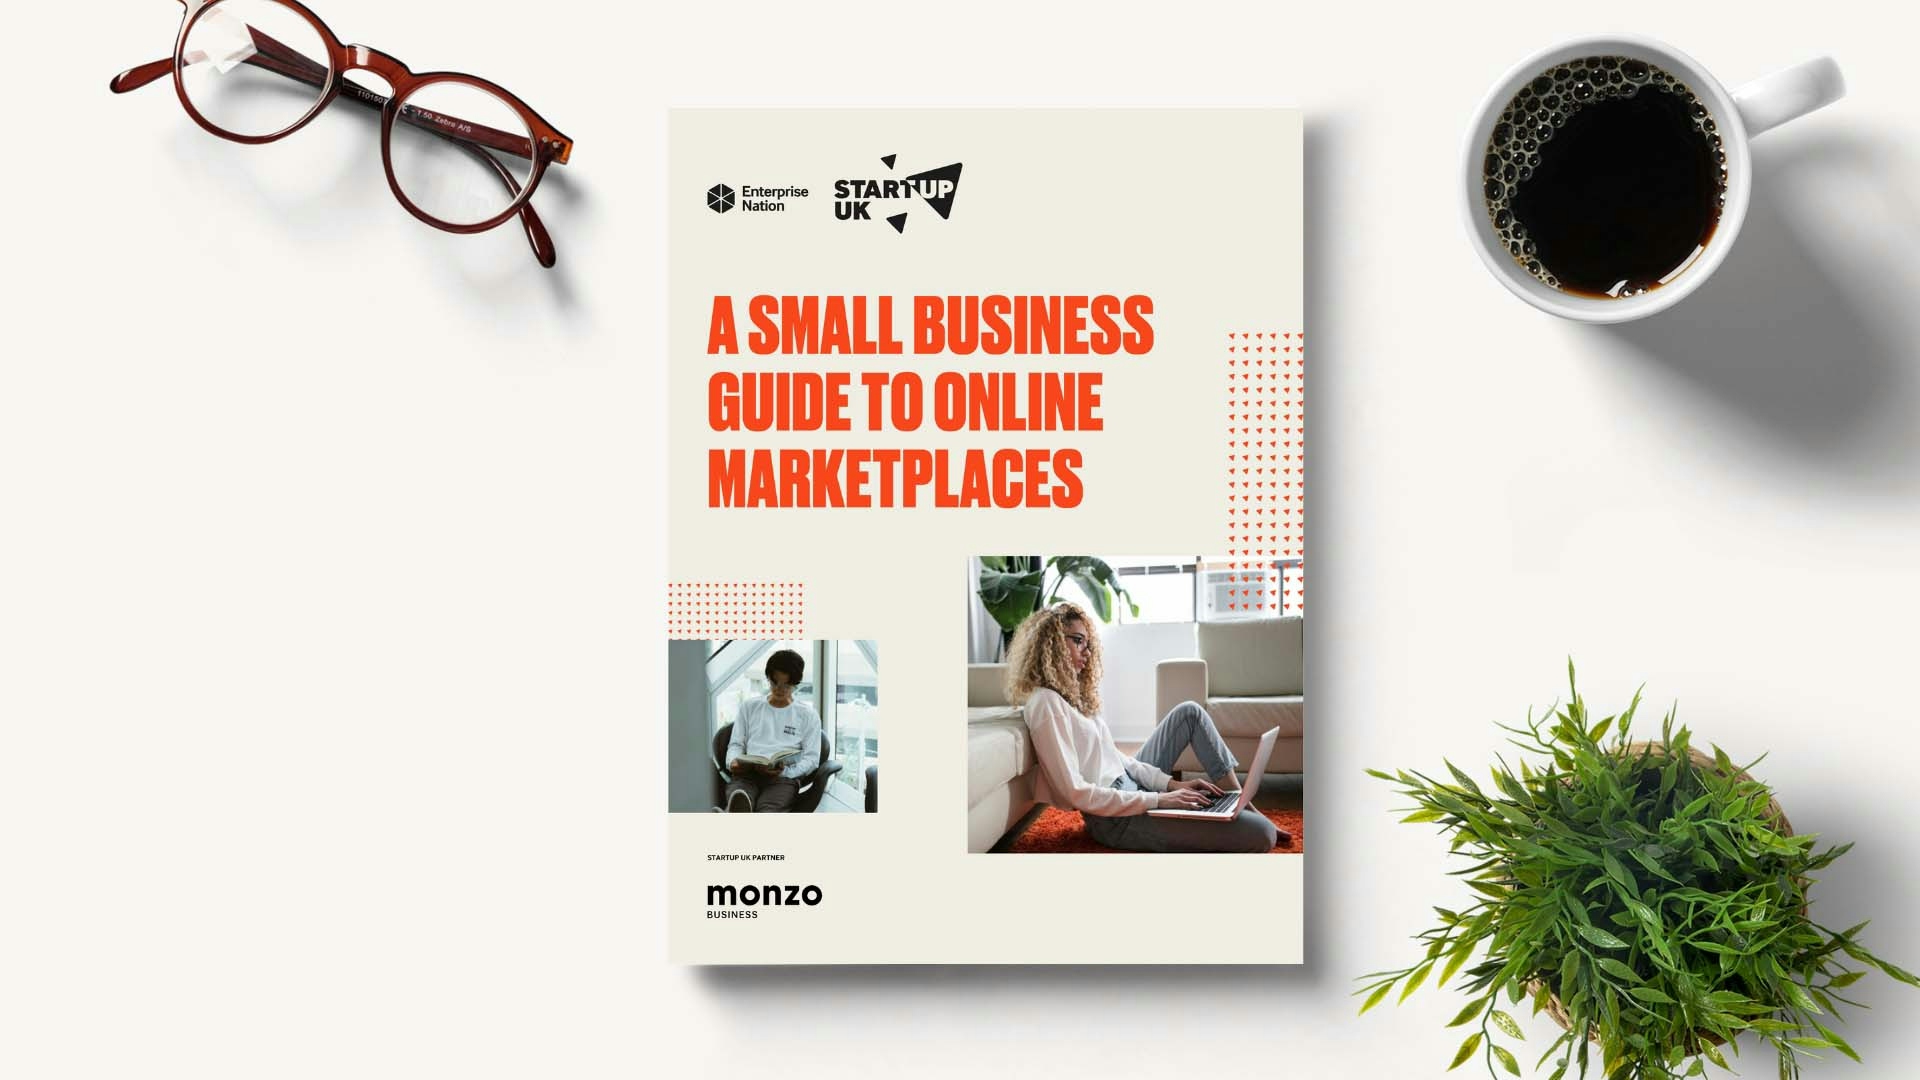 How to sell your products and services through online marketplaces